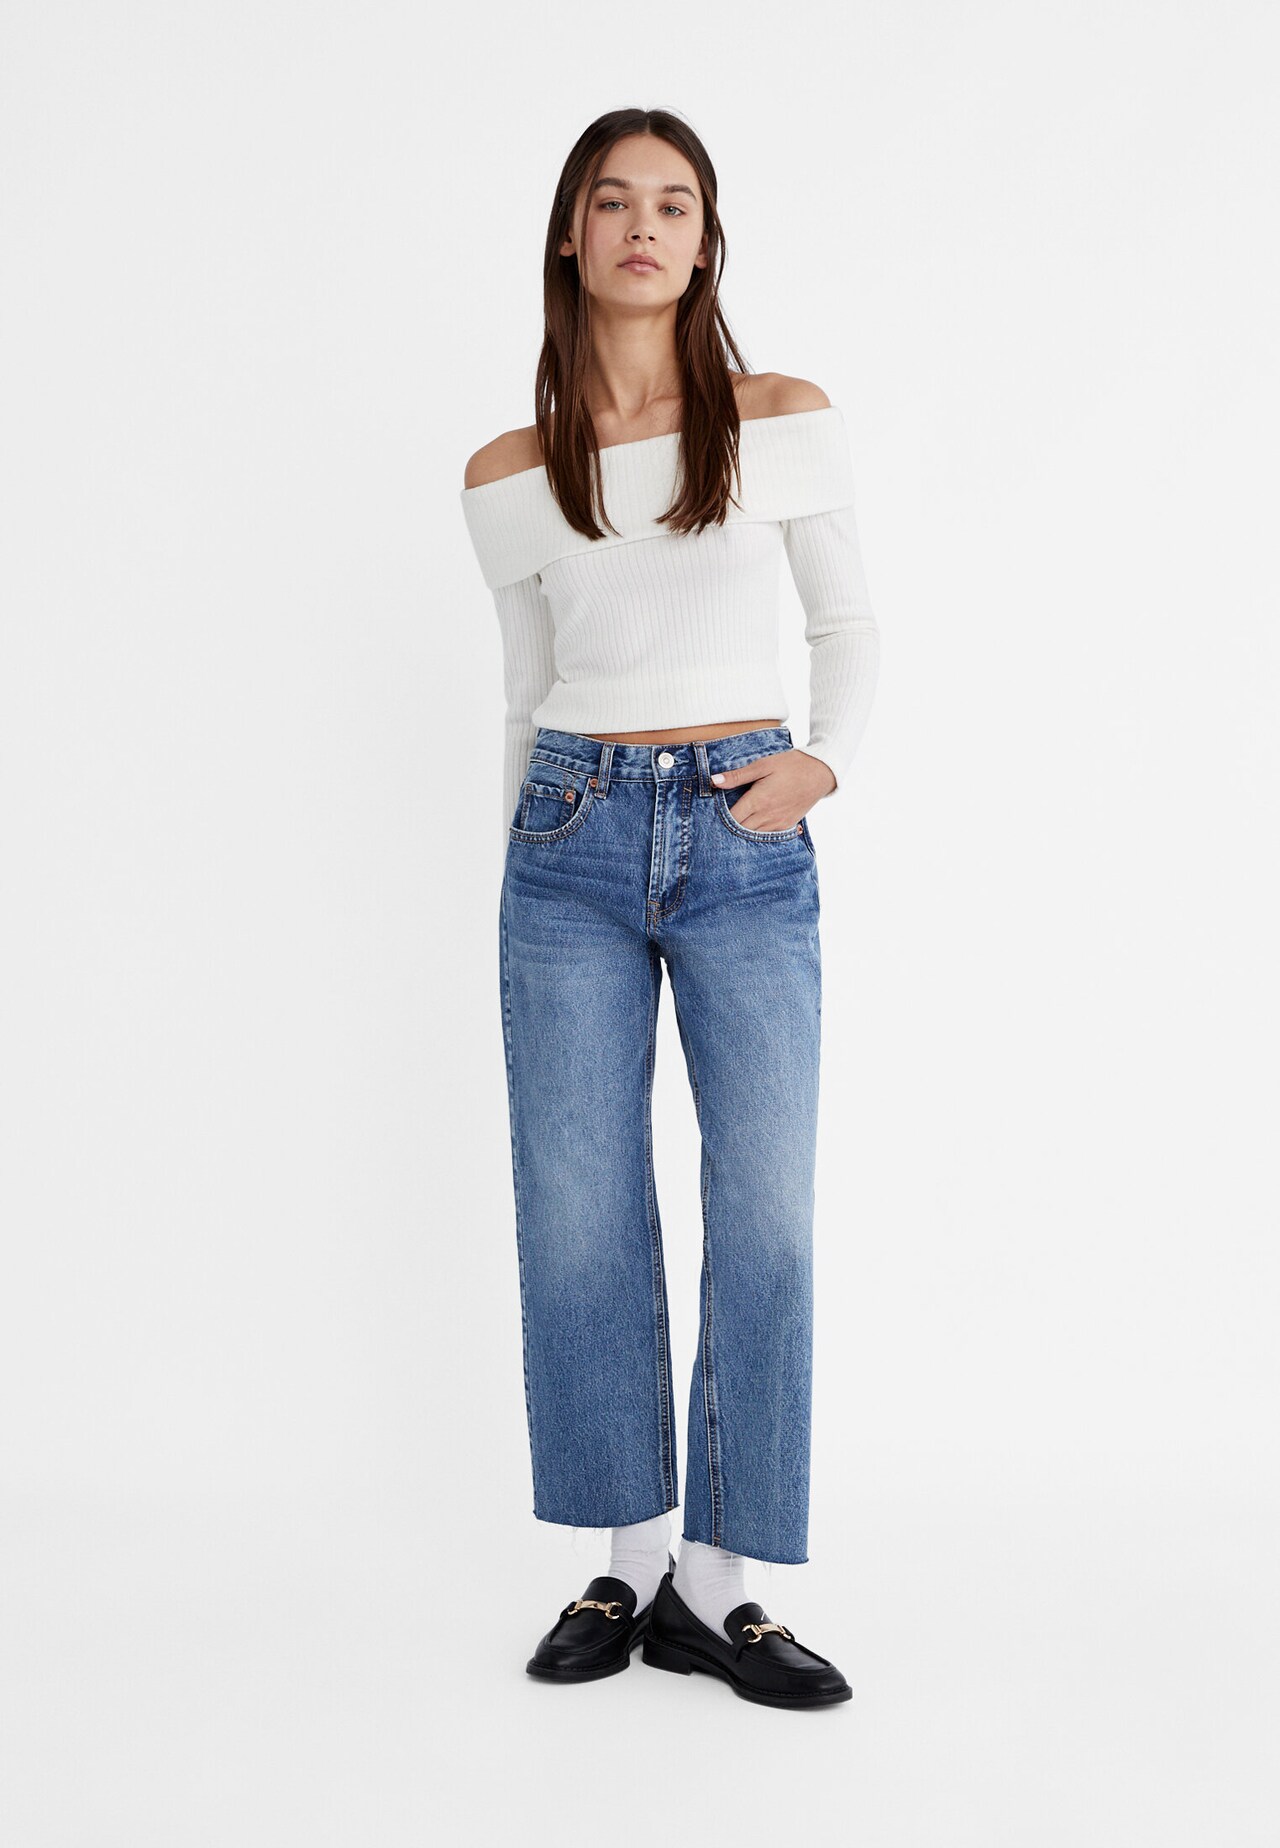 Jeans straight cropped - Moda de mulher